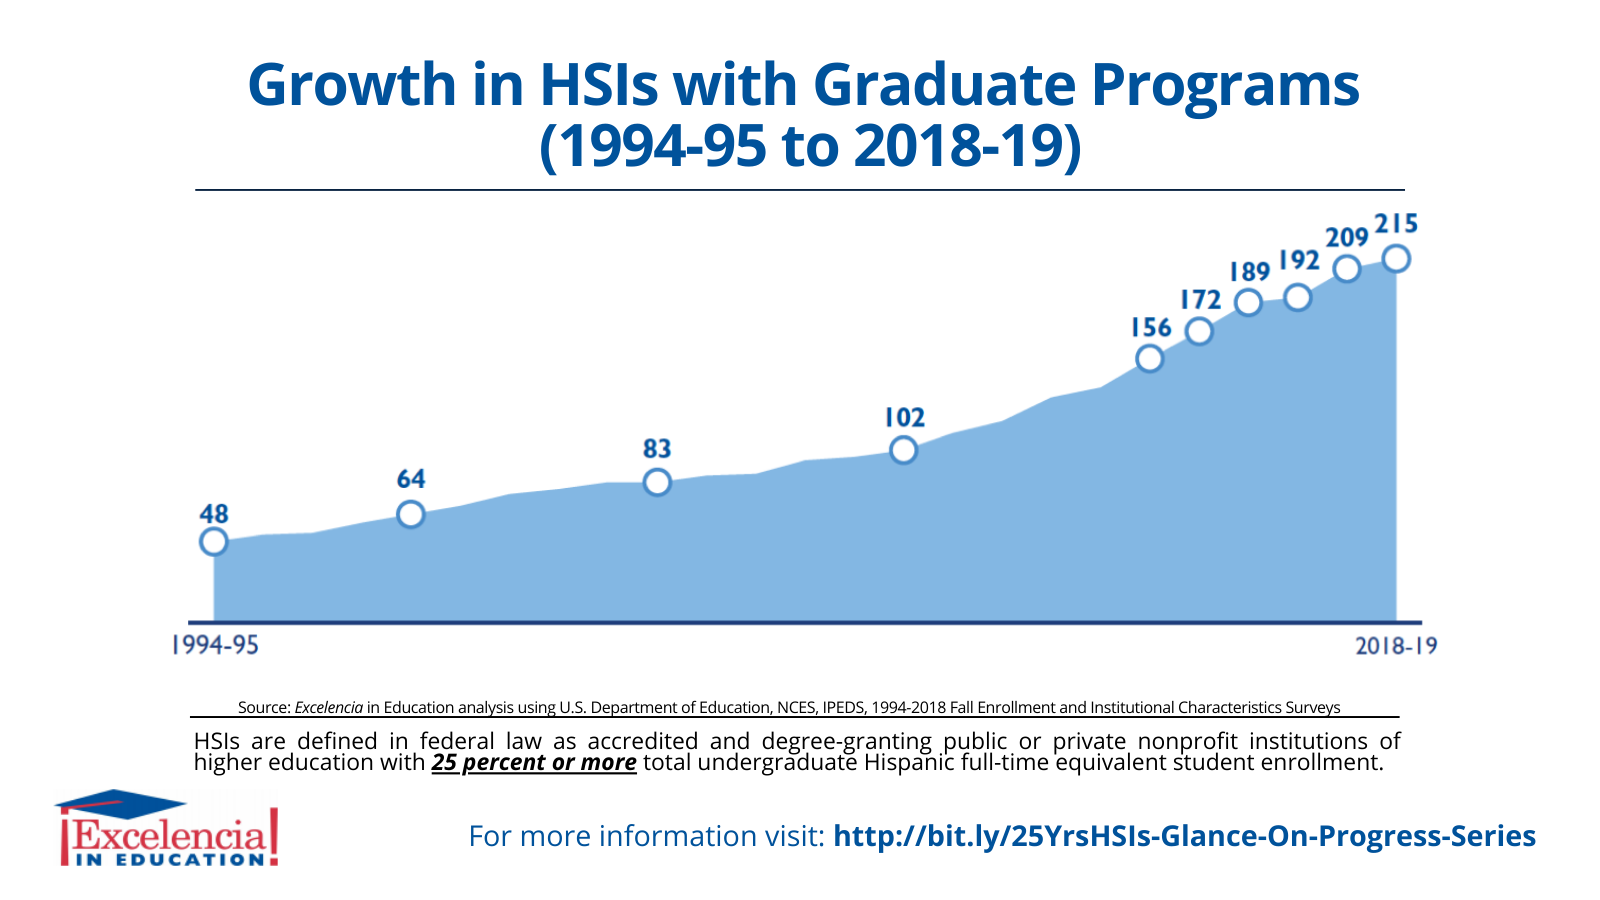 Growth in Hispanic-Serving Institutions (HSIs) w/Graduate Programs 1994-95 to 2018-19